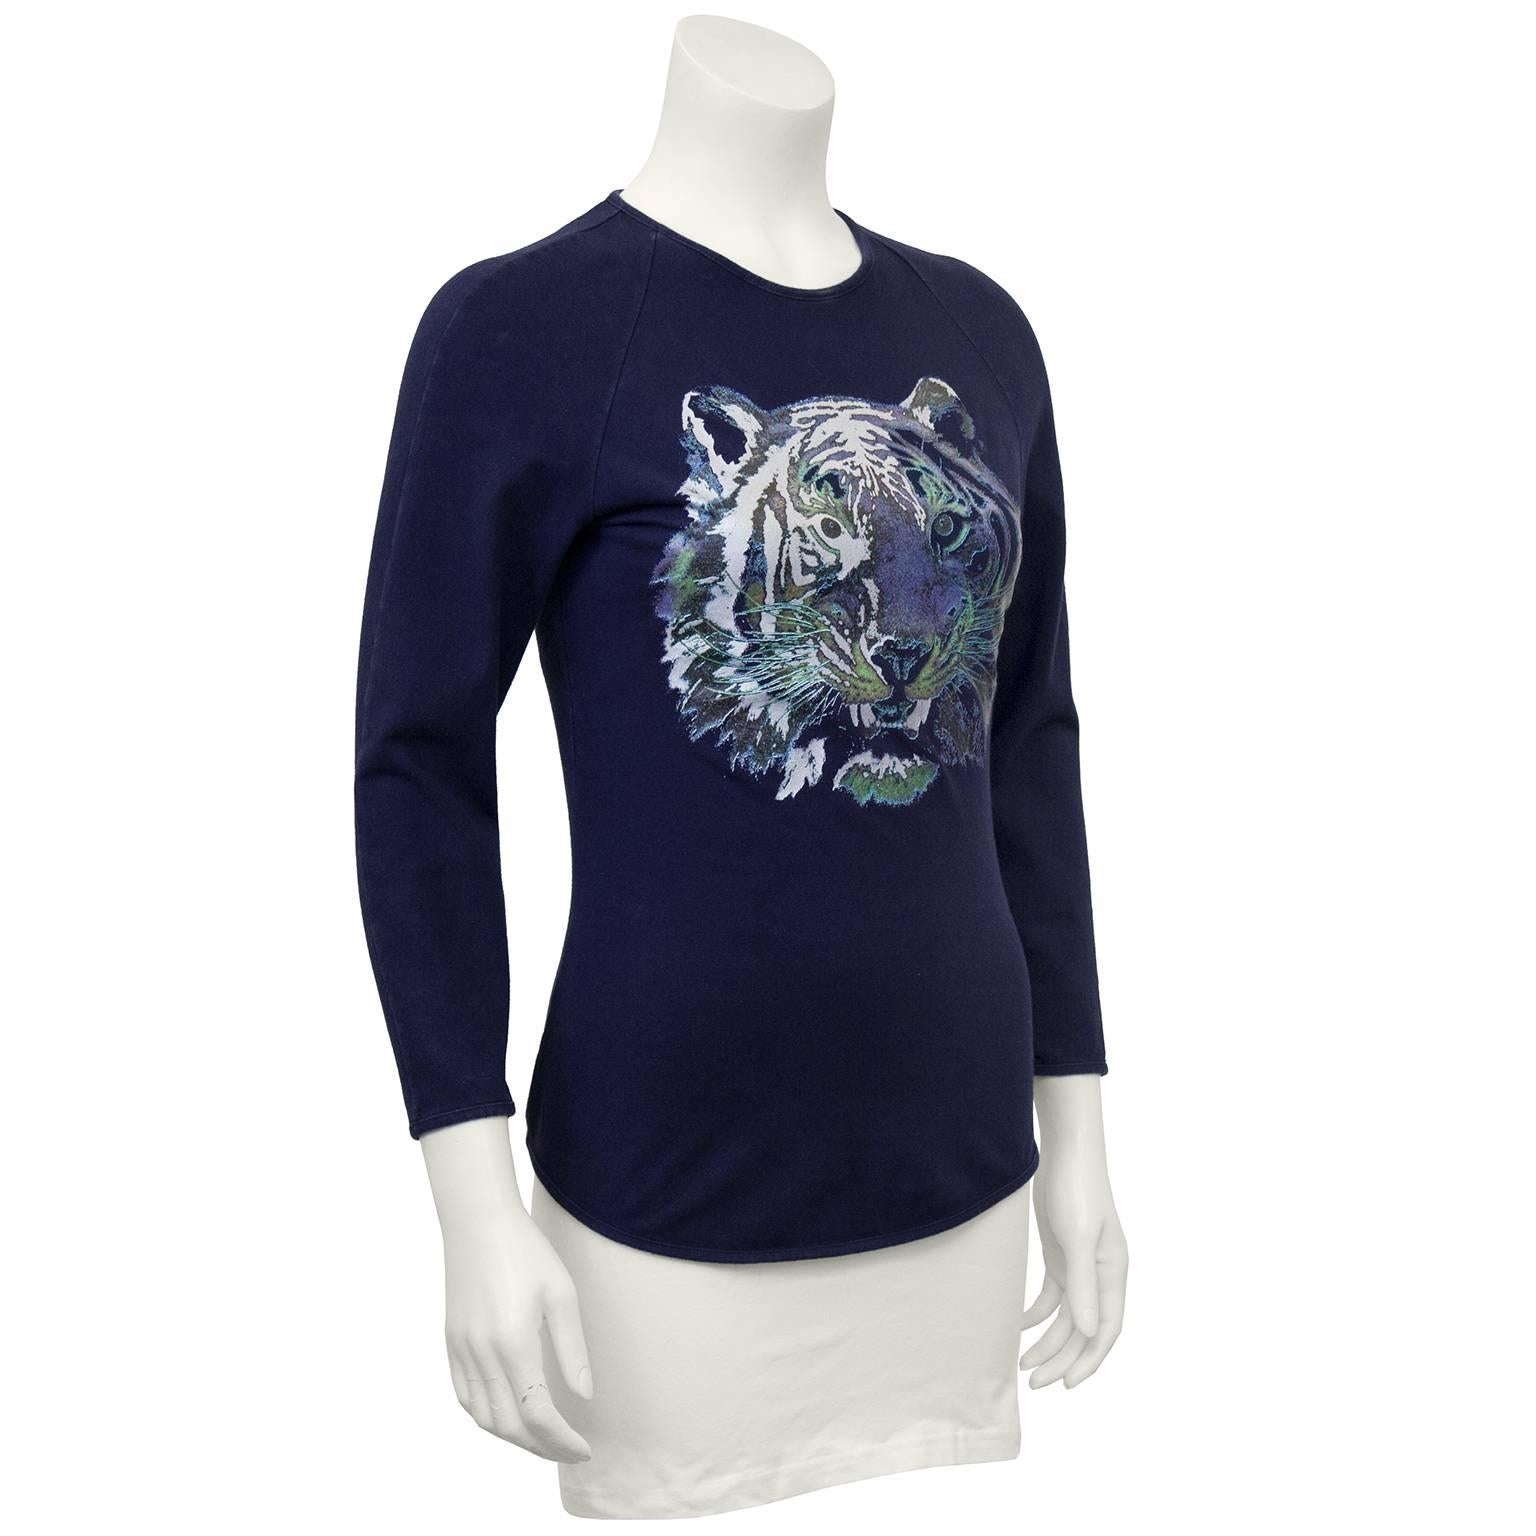 Circa 2000 navy blue cotton and elastine Chloe top featuring a tigers head graphic in white, blue and an iridescent green. Shirt is baseball style with 3/4 sleeves and curved hem. Size M, excellent vintage condition. These are part of her late